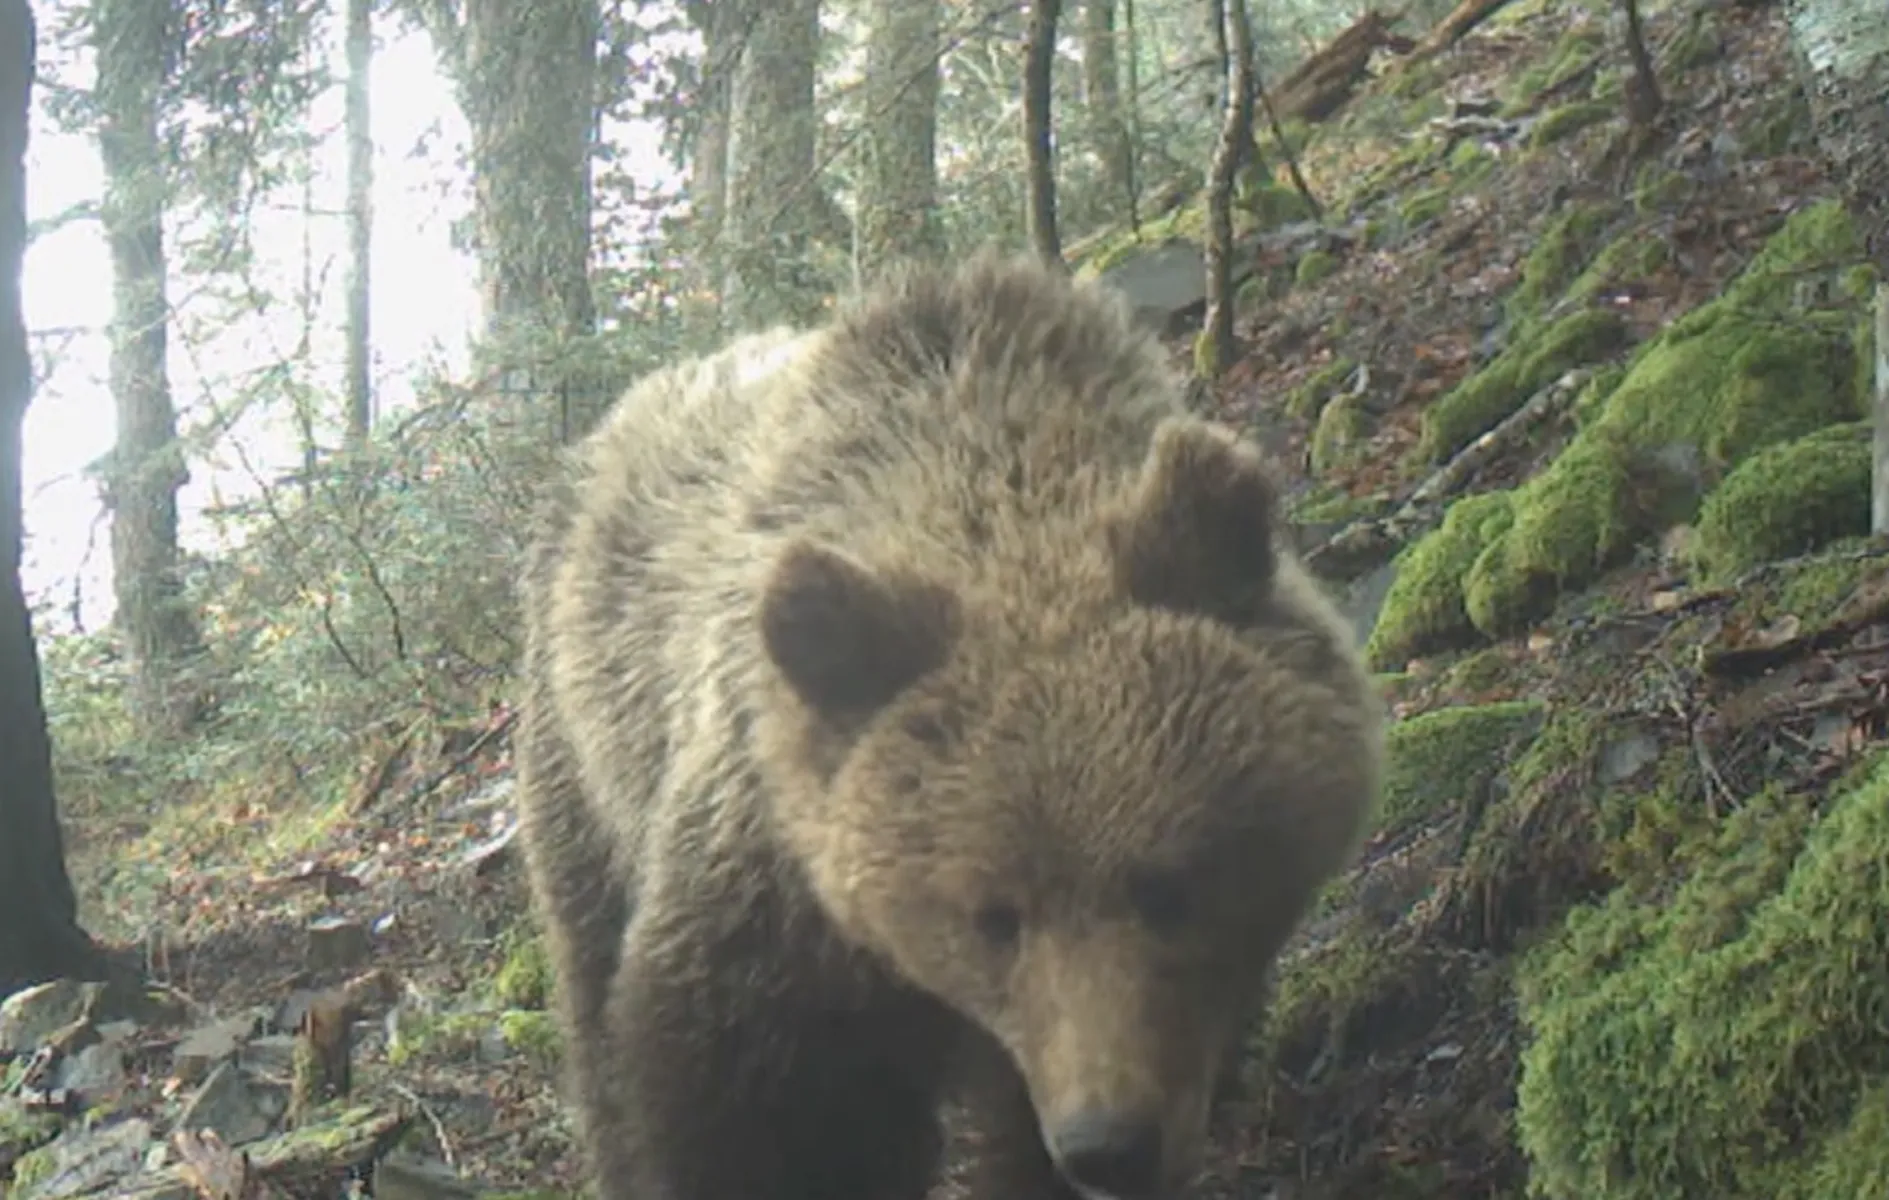 A camera trap shot of a bear in the forest